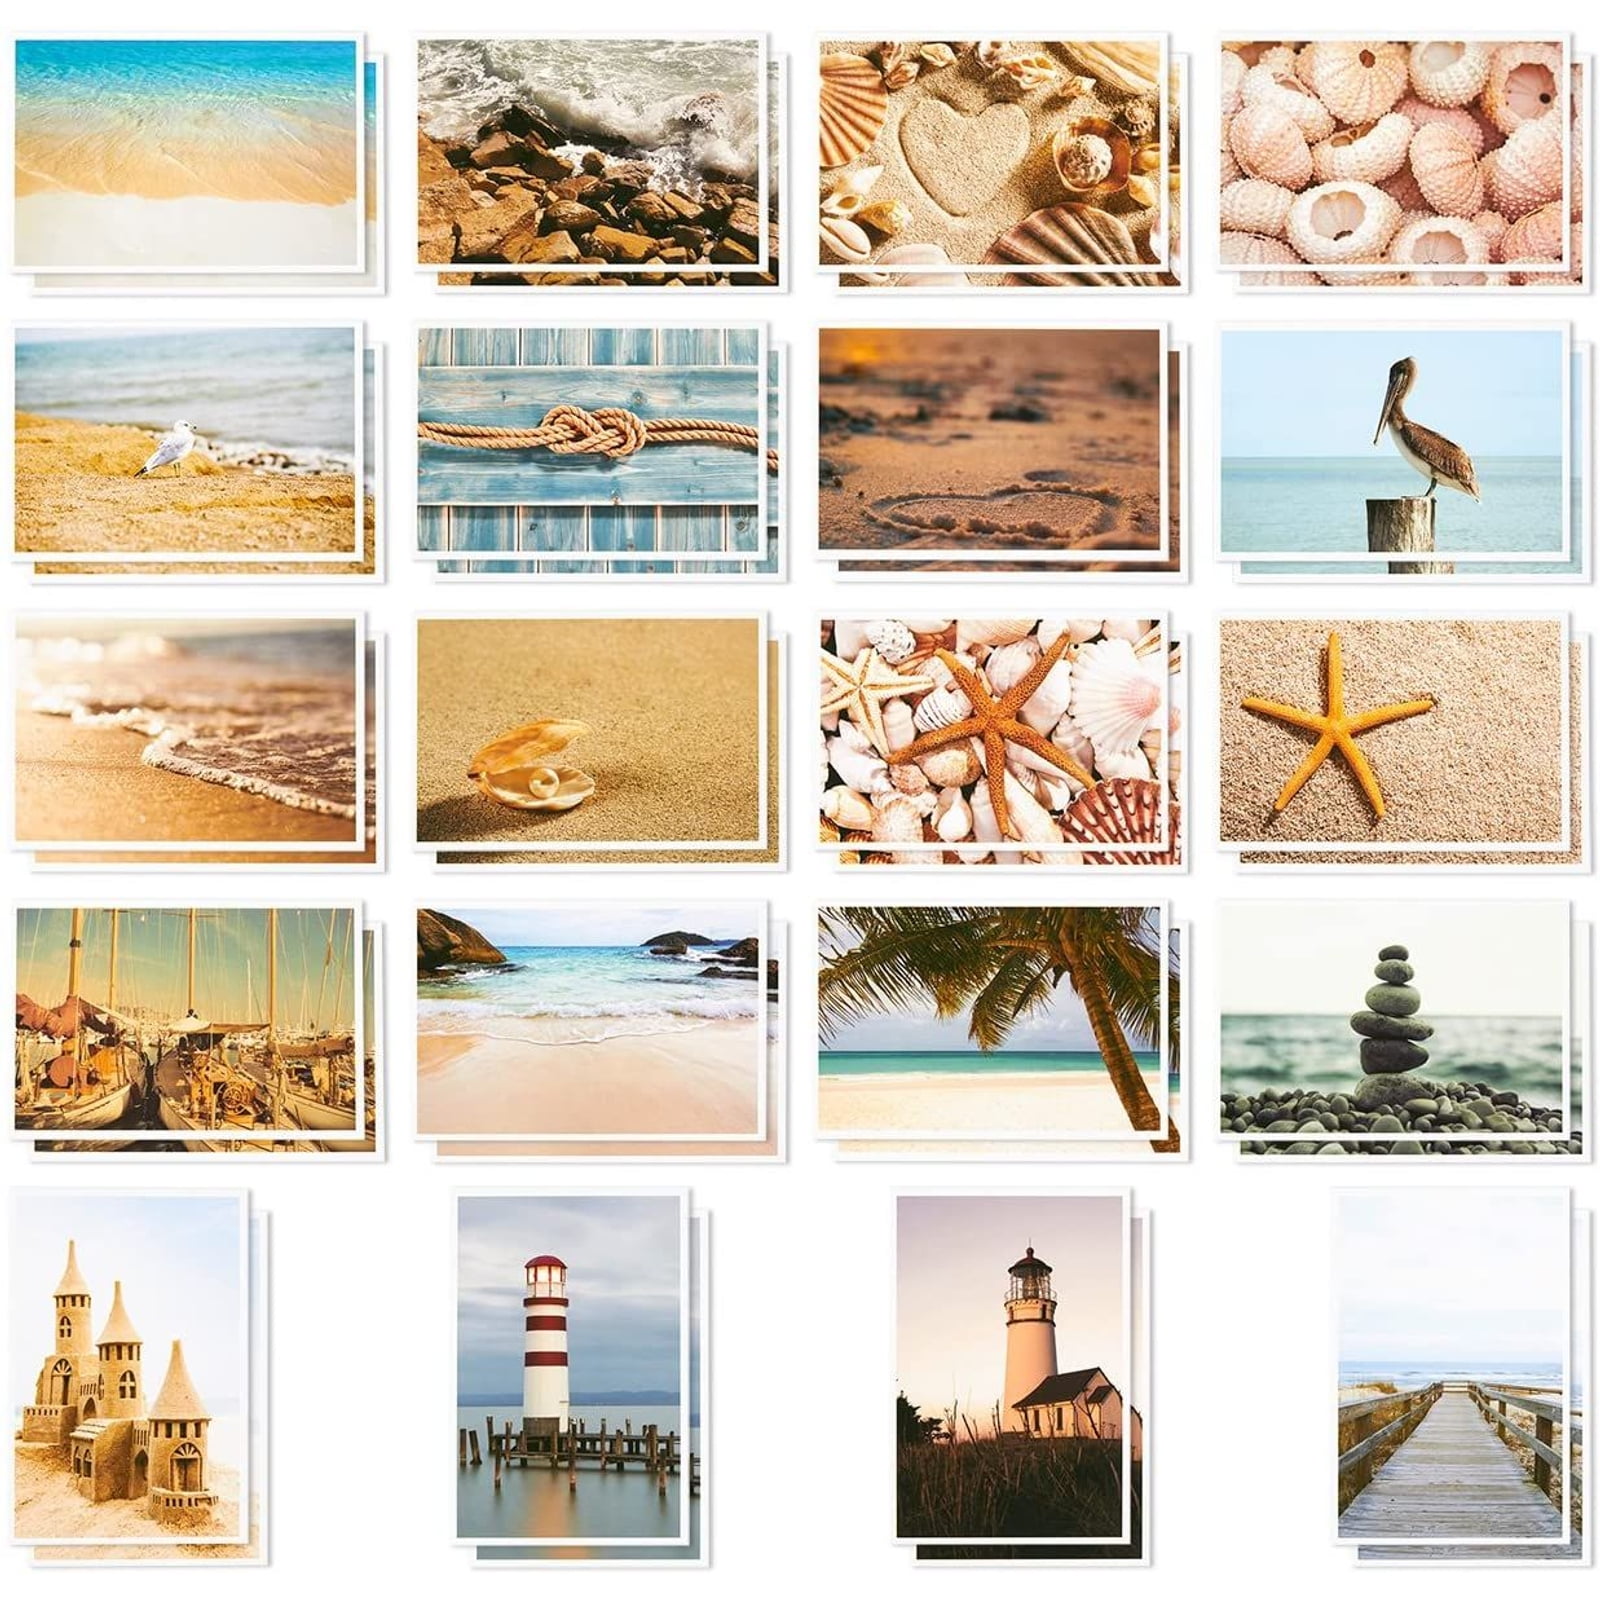 QTY 40 POSTAL THEMED POST CARDS SUITABLE FOR COMPERS AND COLLECTORS 